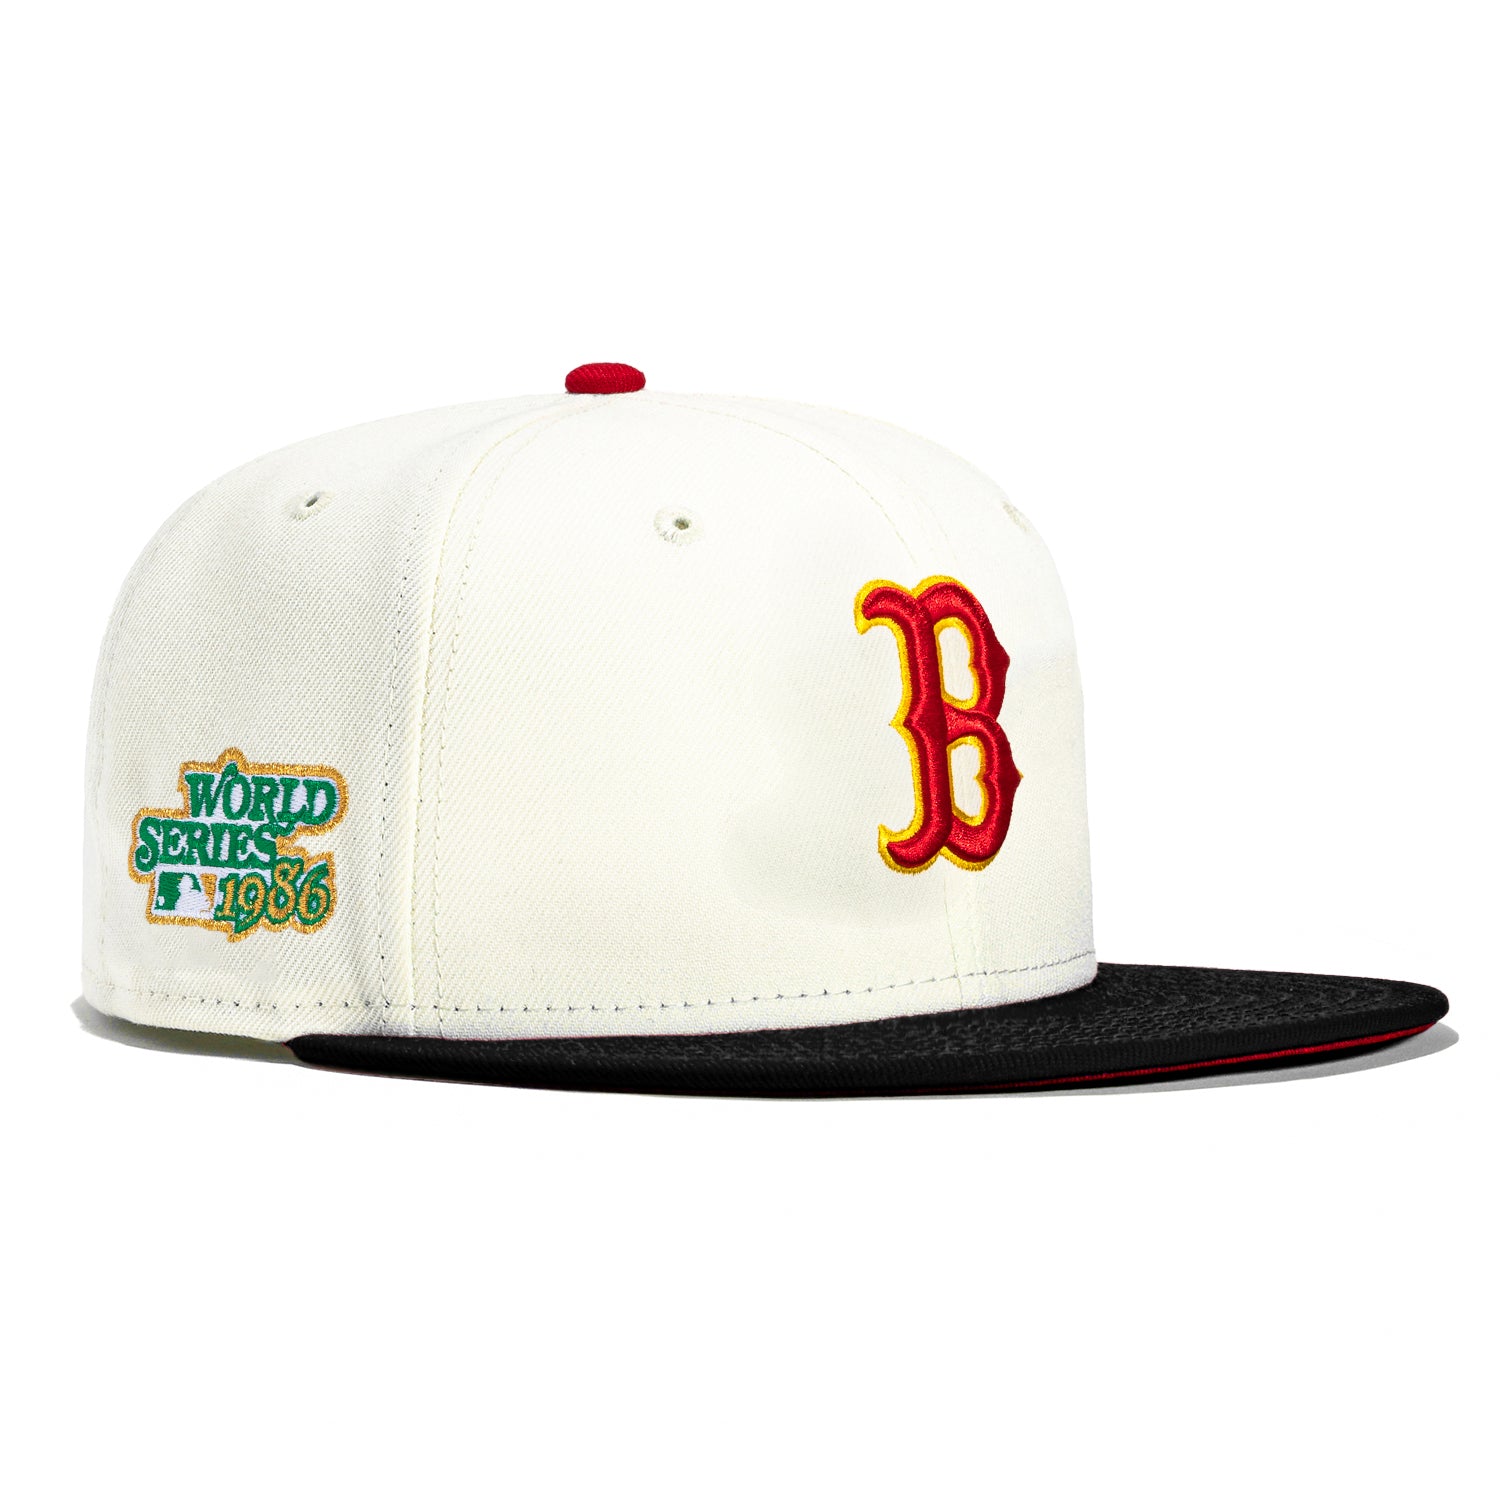 New Era 59FIFTY Boston Red Sox 1986 World Series Patch Hat - White, Black, Red White/Black/Red / 6 7/8